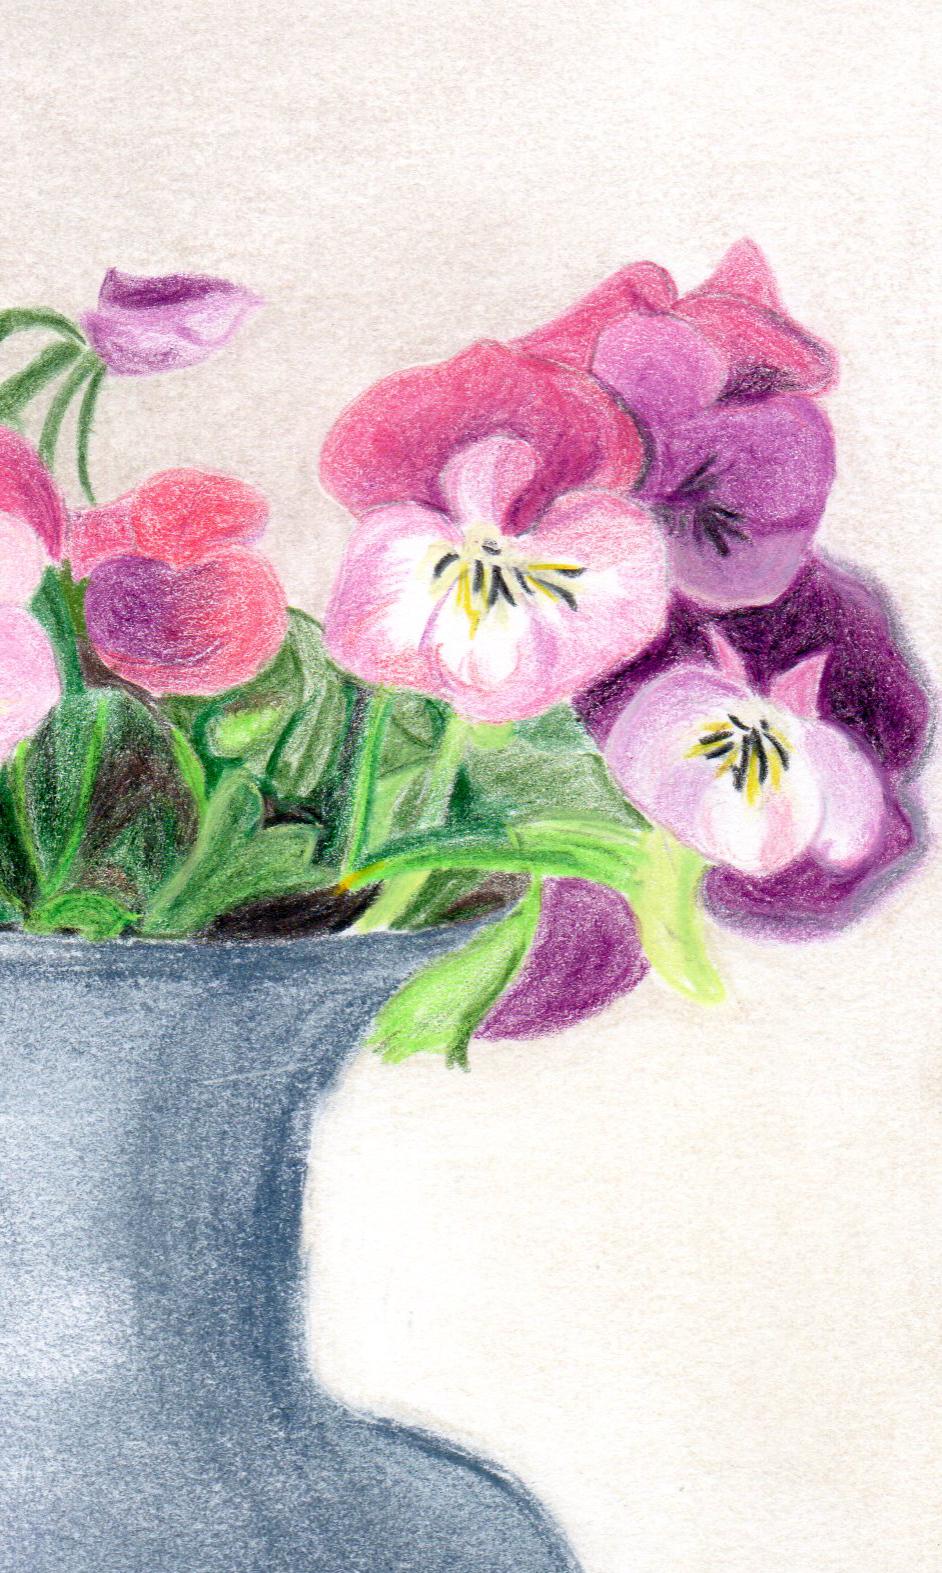 Pastel and Color Pencils on Hahnemühle paper 300g - Pastel, Drawing, flowers, Interior
Work Title : Pansy and Vase
Artist : Gabriel Riesnert (French artist, Born in 1970, lives and works in Paris and south of France.)
The work is signed in front.